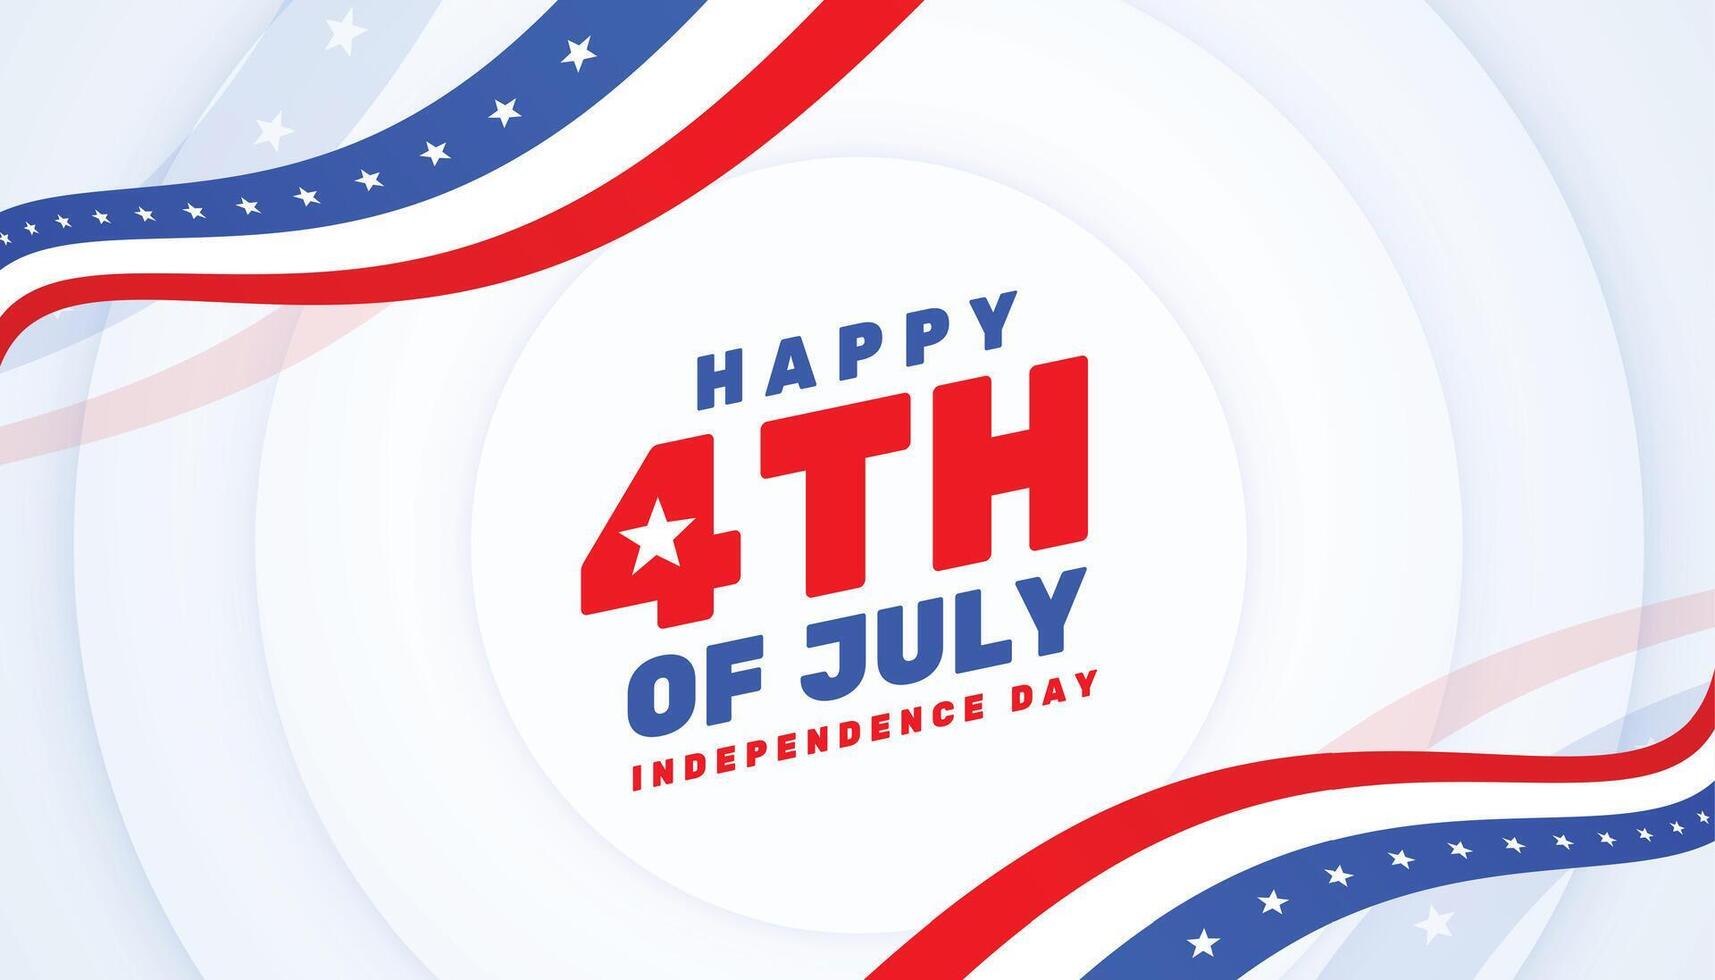 happy 4th of july independence day in unique wave style design vector